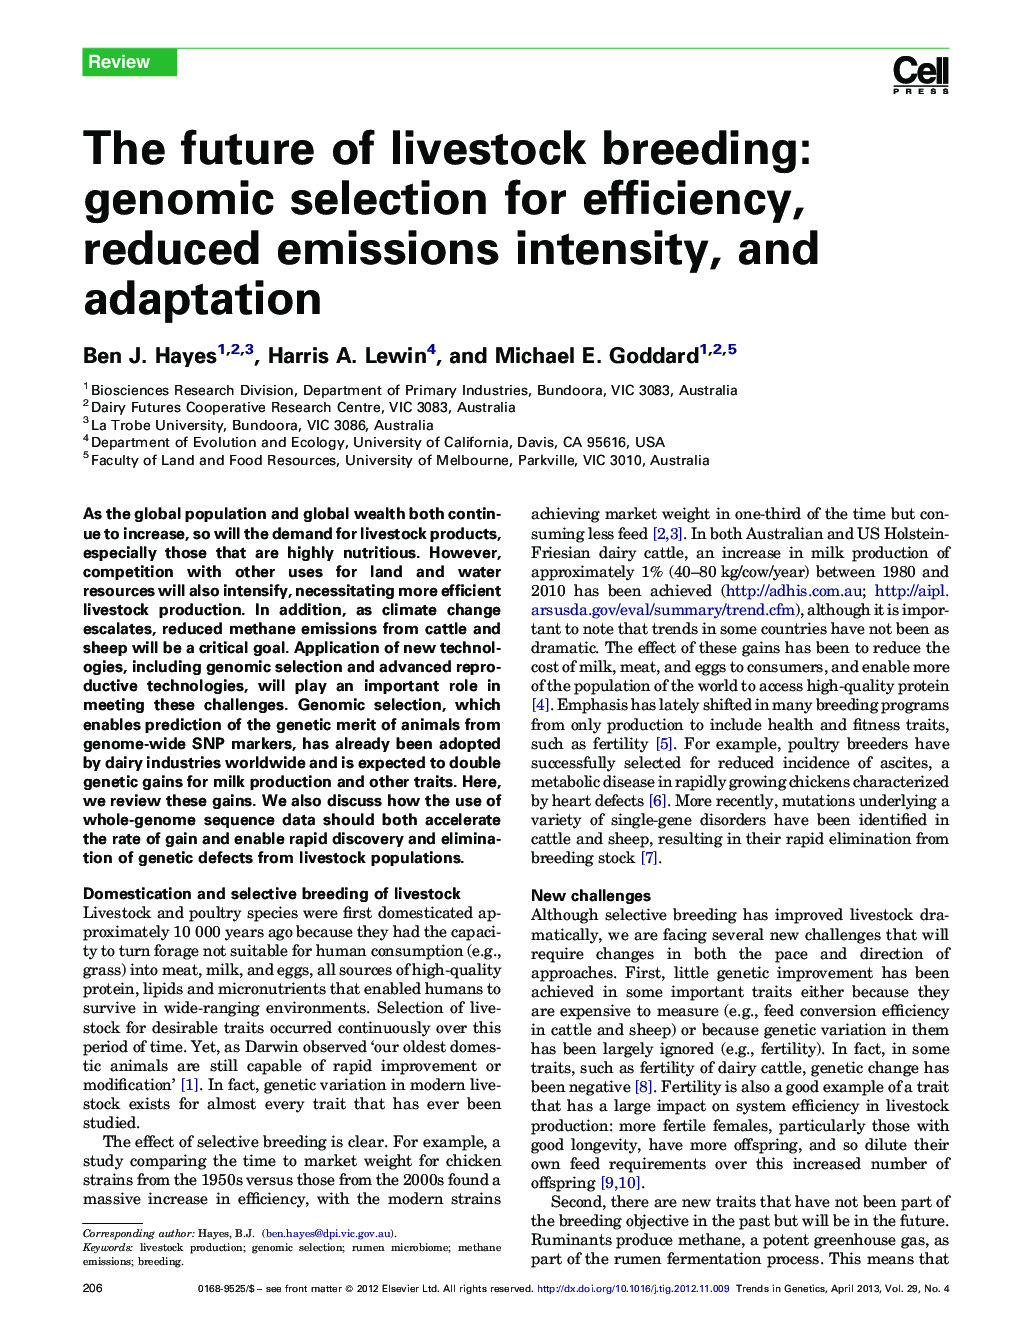 The future of livestock breeding: genomic selection for efficiency, reduced emissions intensity, and adaptation